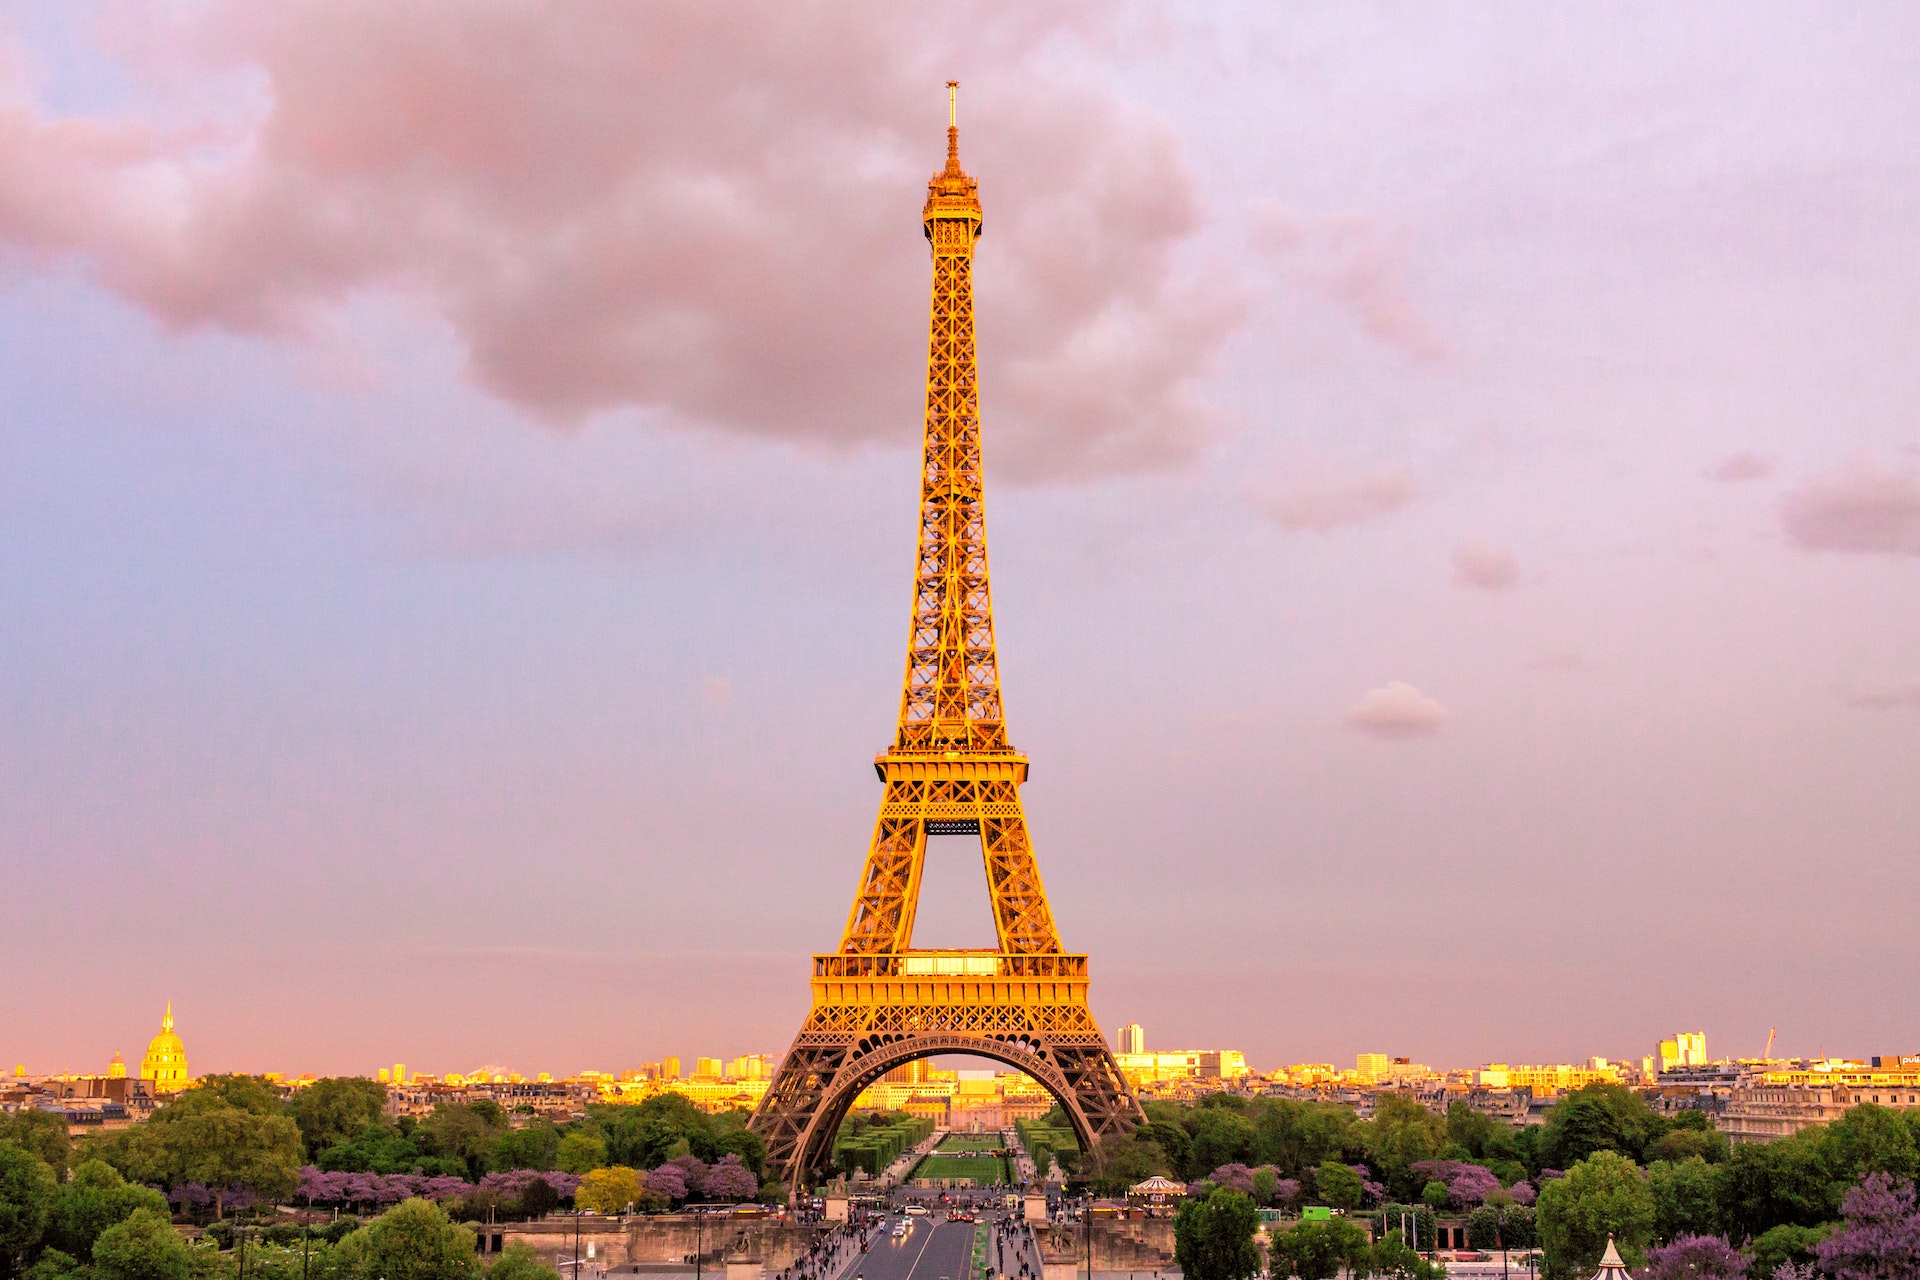 The Eiffel tower at sunset